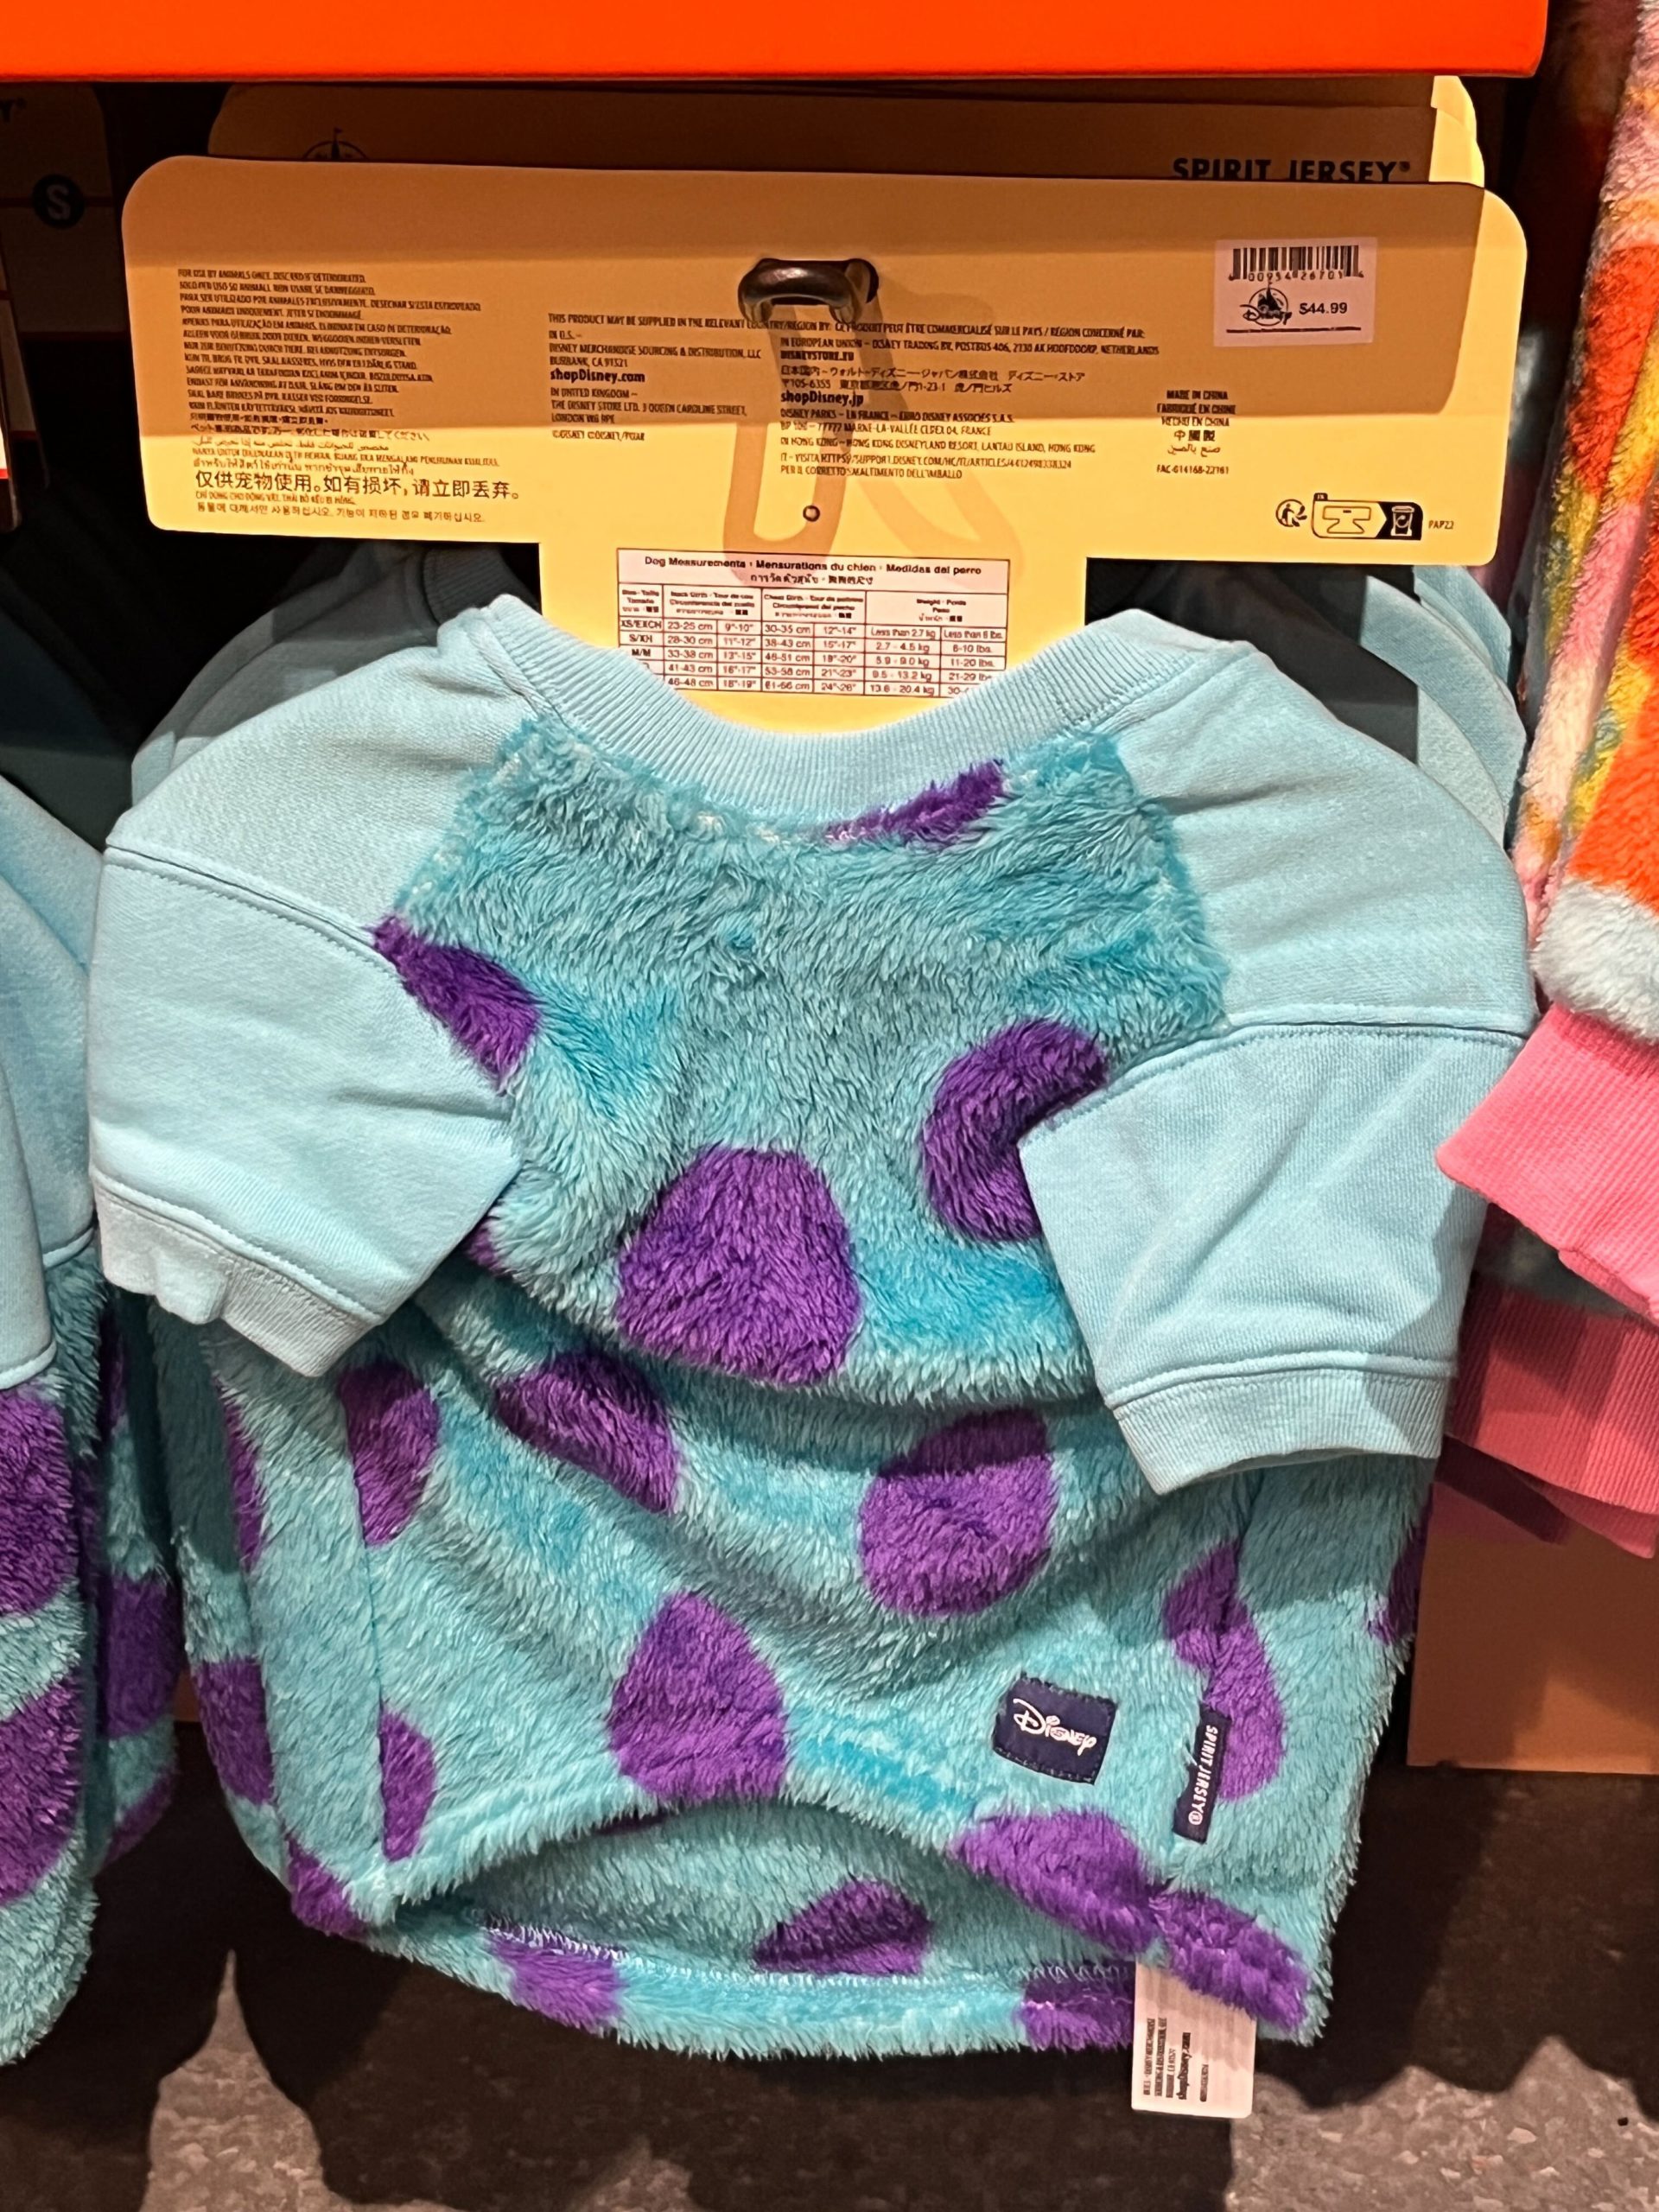 turning red sulley pixar spirit jerseys for pets